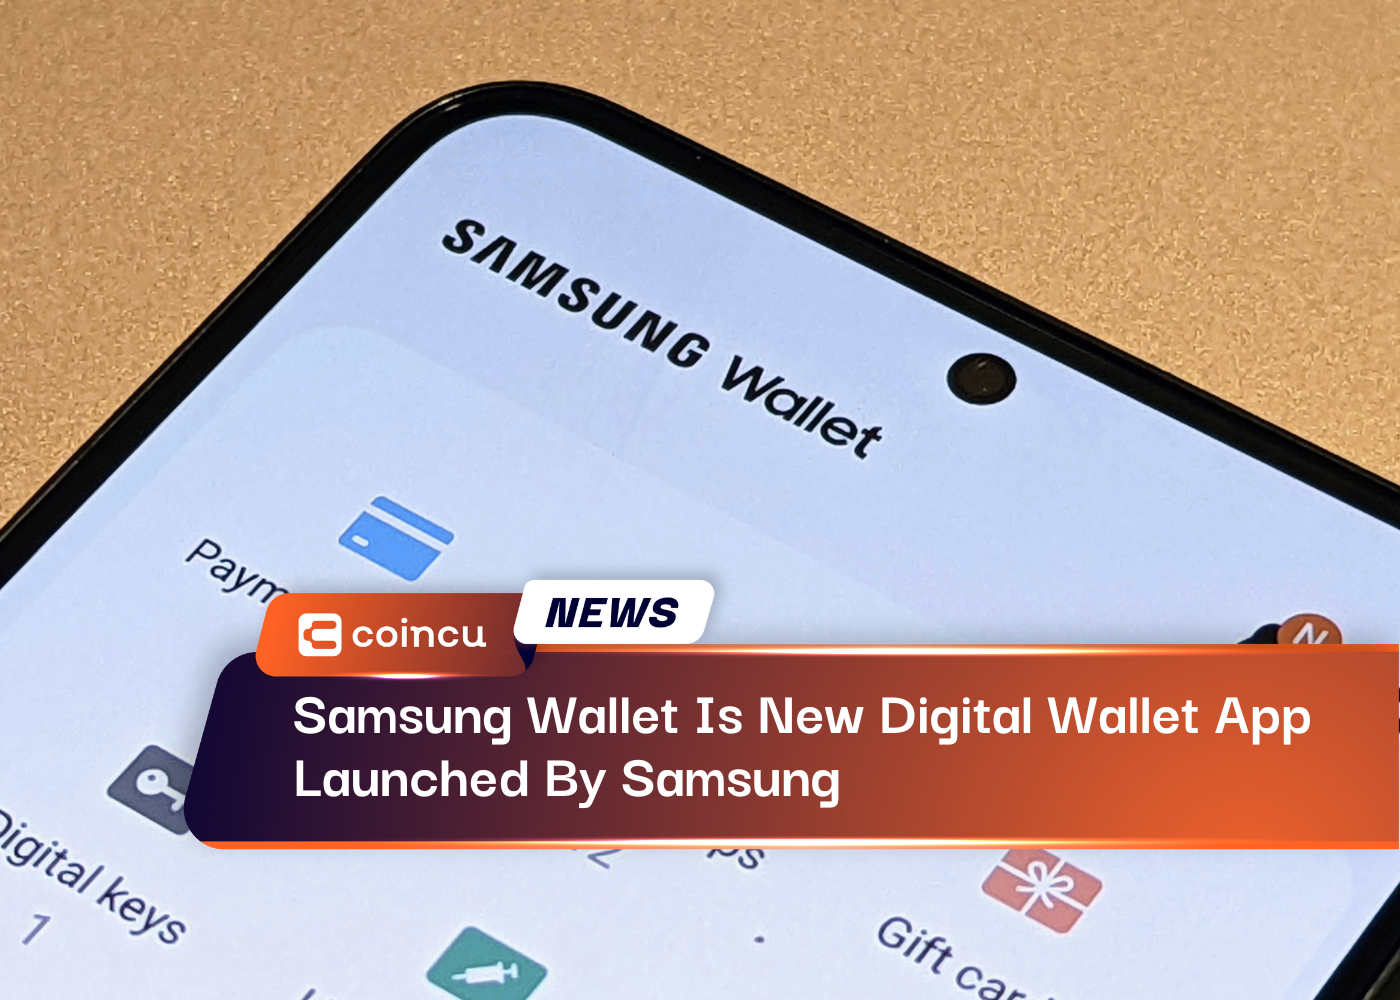 Samsung Wallet Is New Digital Wallet App Launched By Samsung